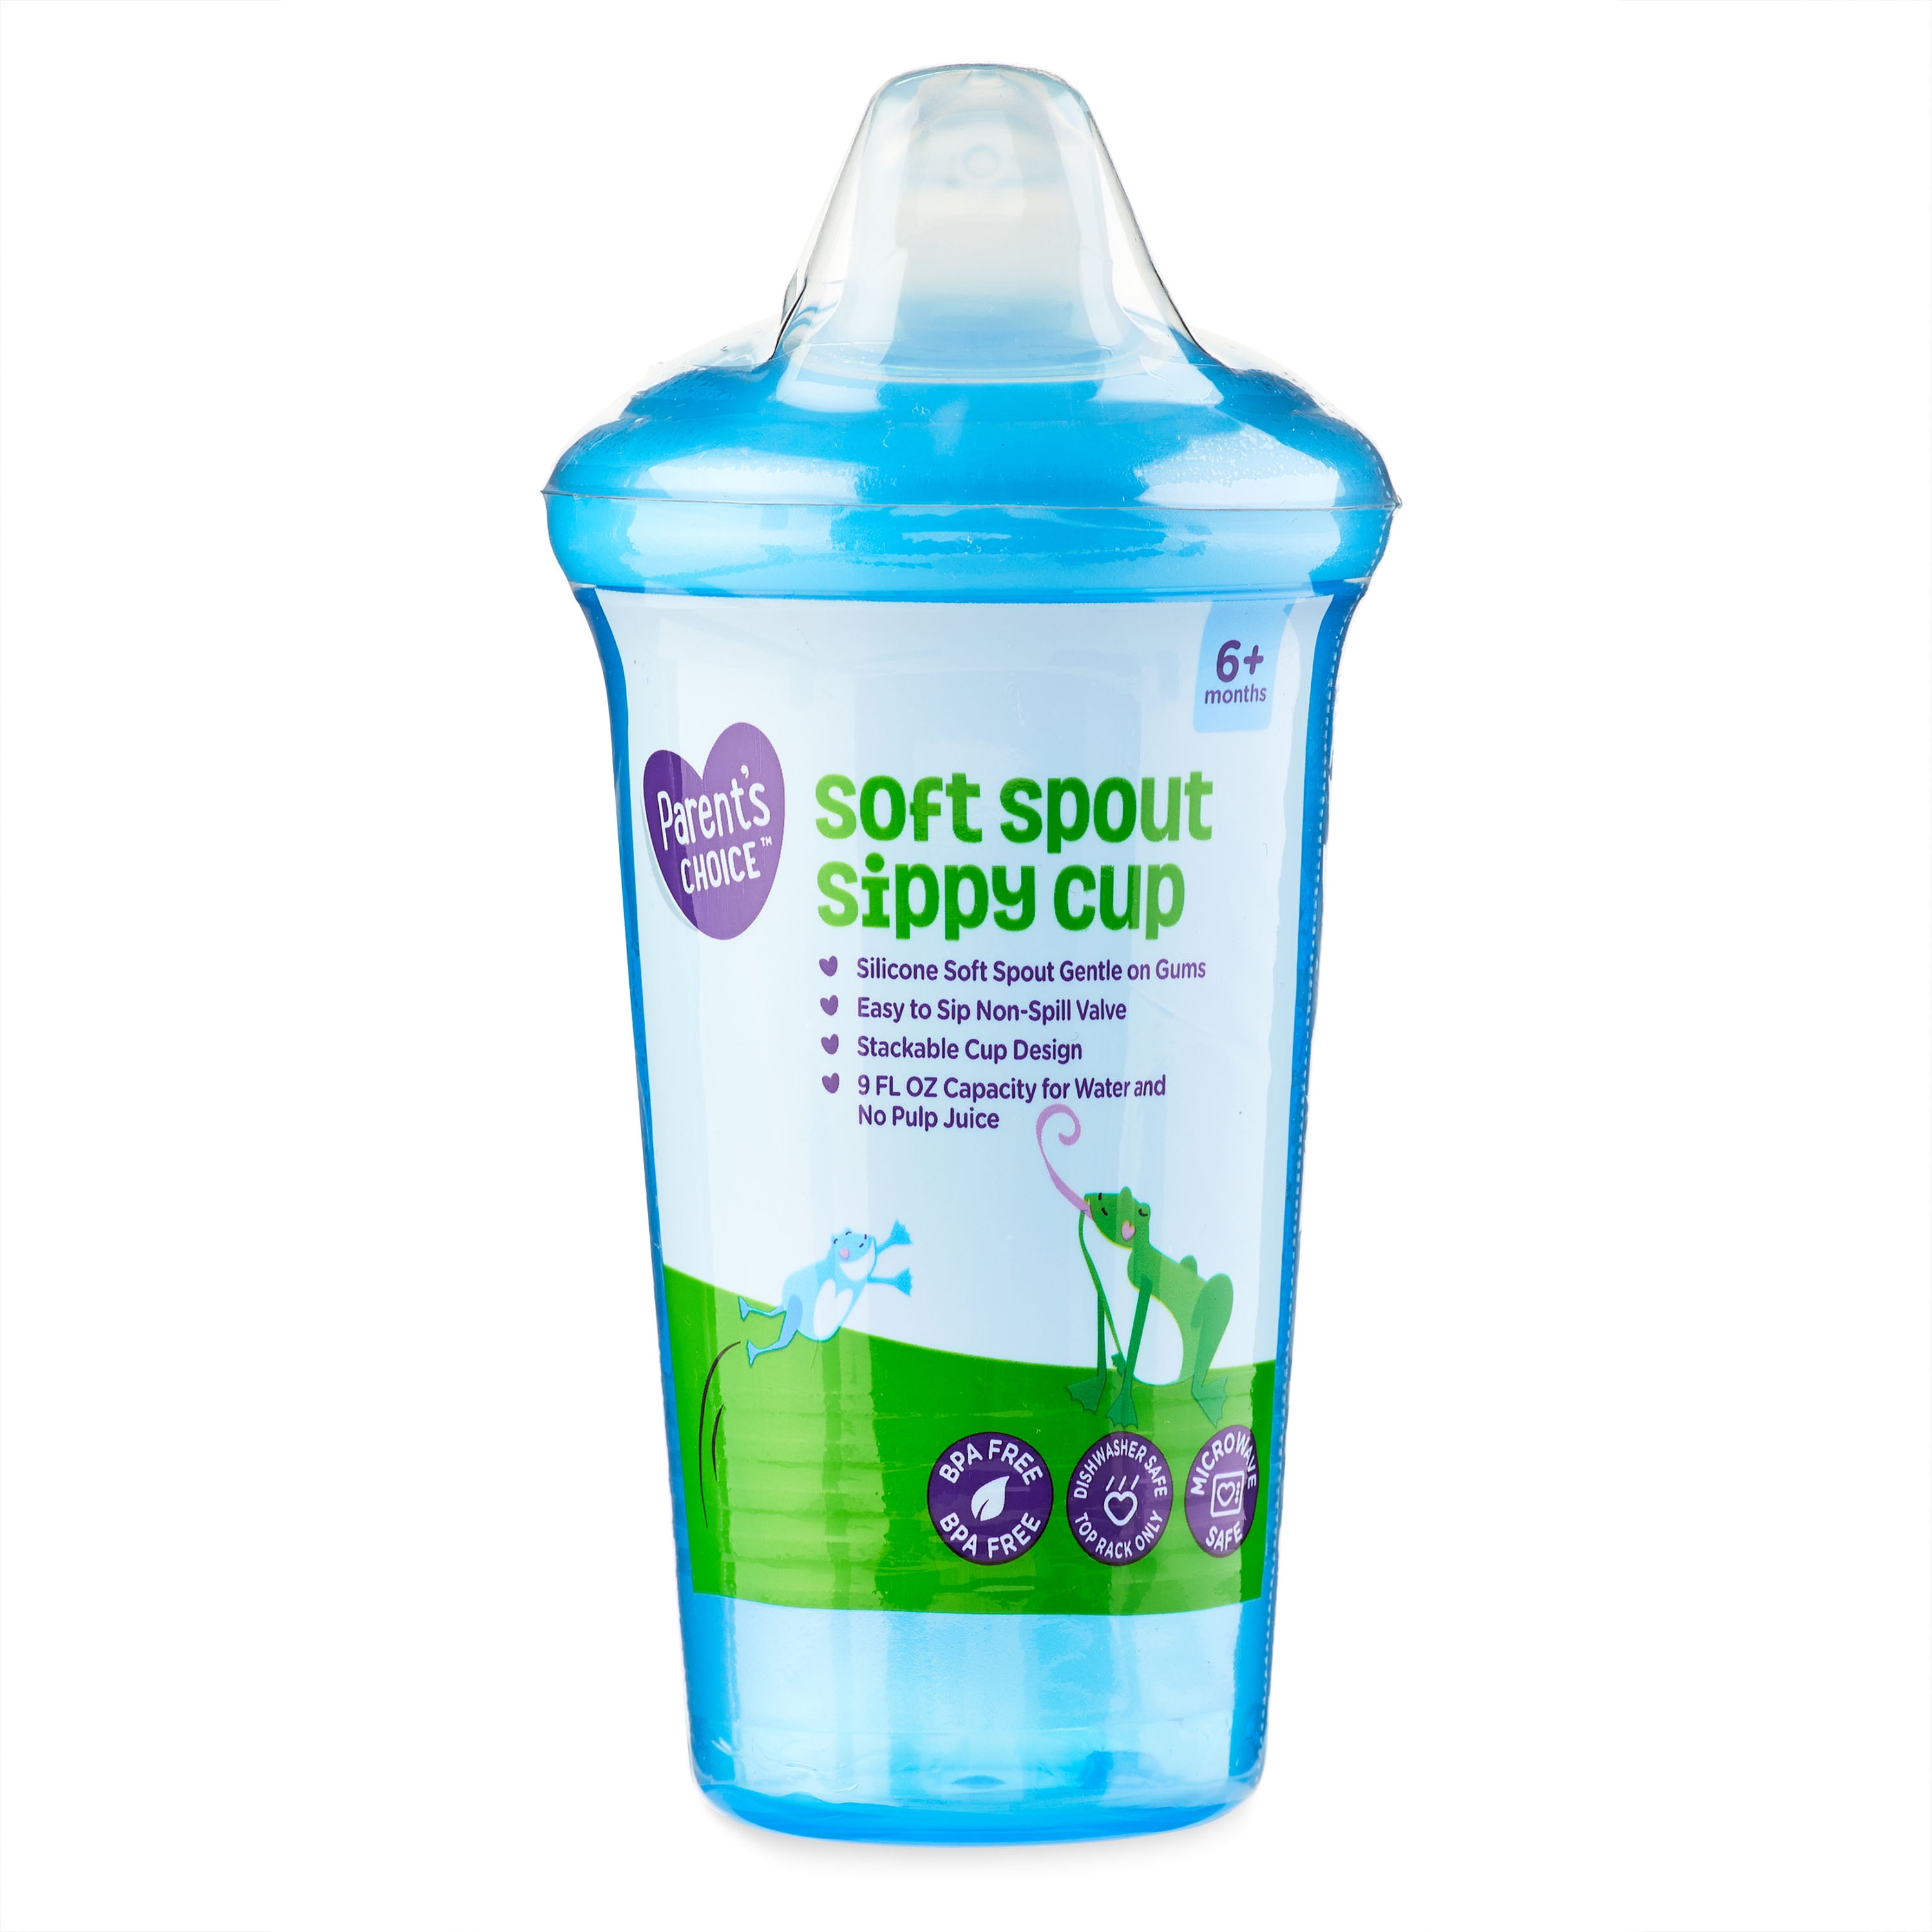 The best sippy cup, recommended by a parent.